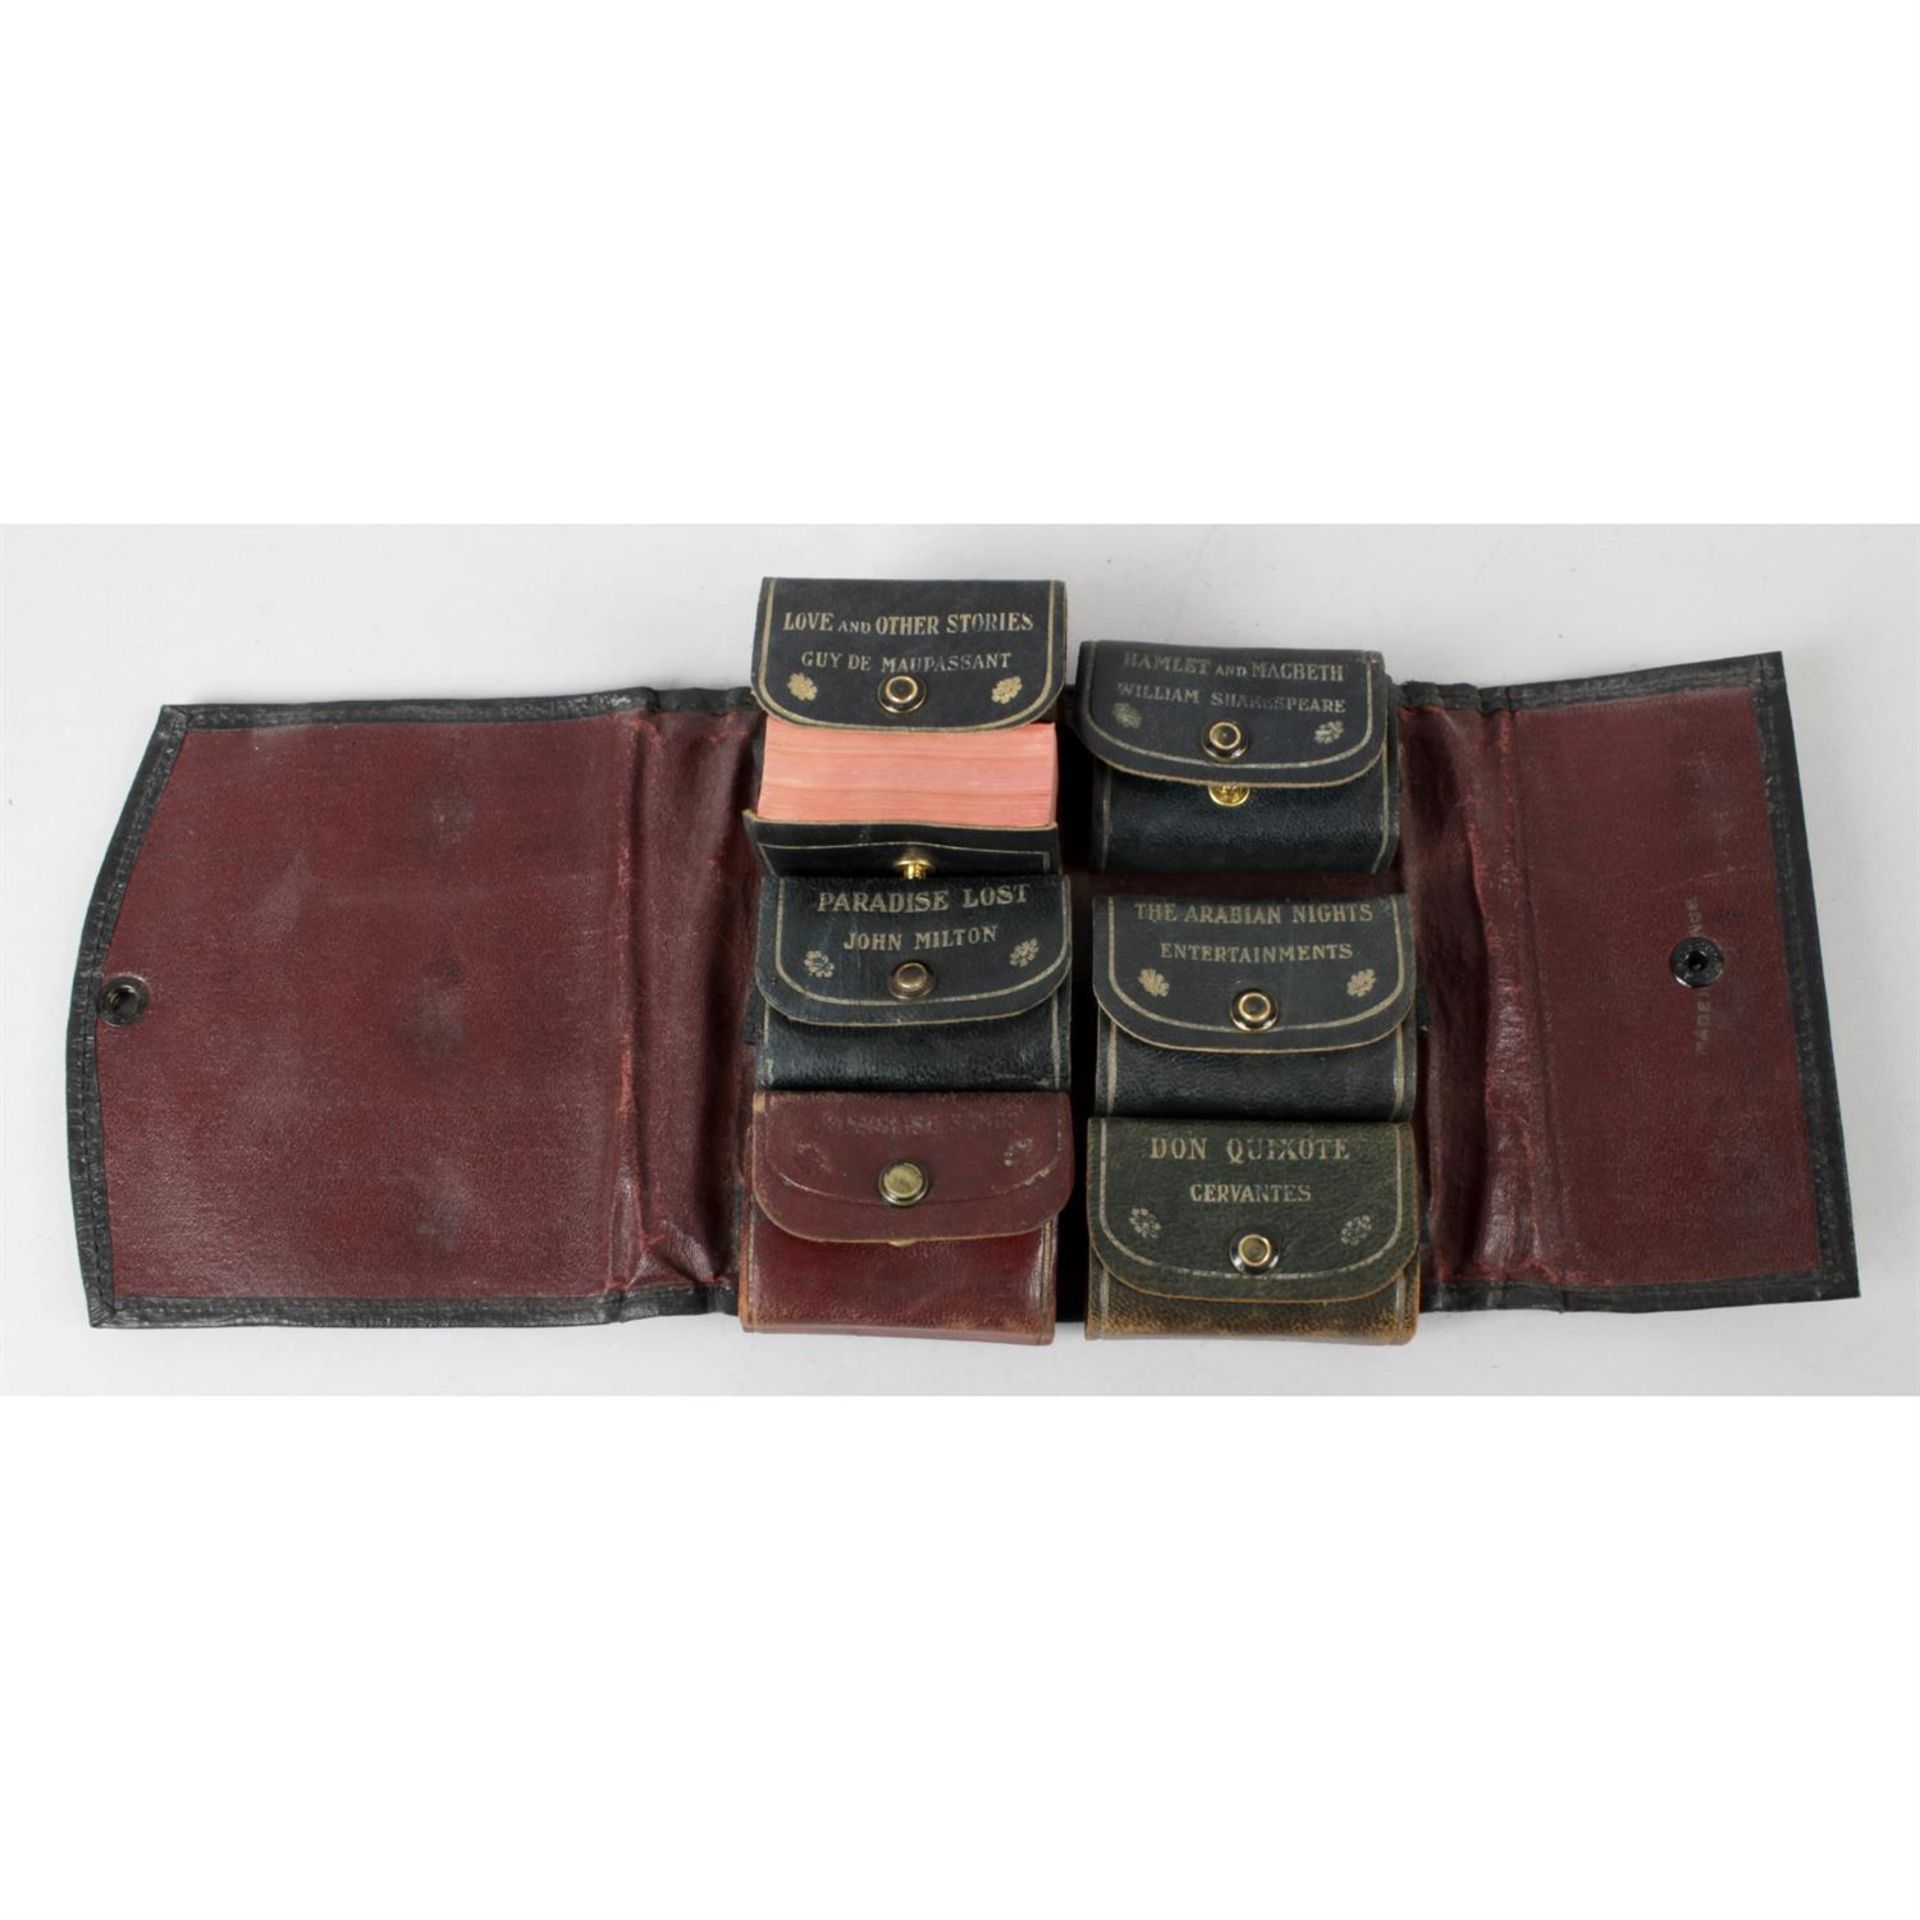 An unusual late 19th/early 20th century black faux leather pouch. - Image 2 of 3